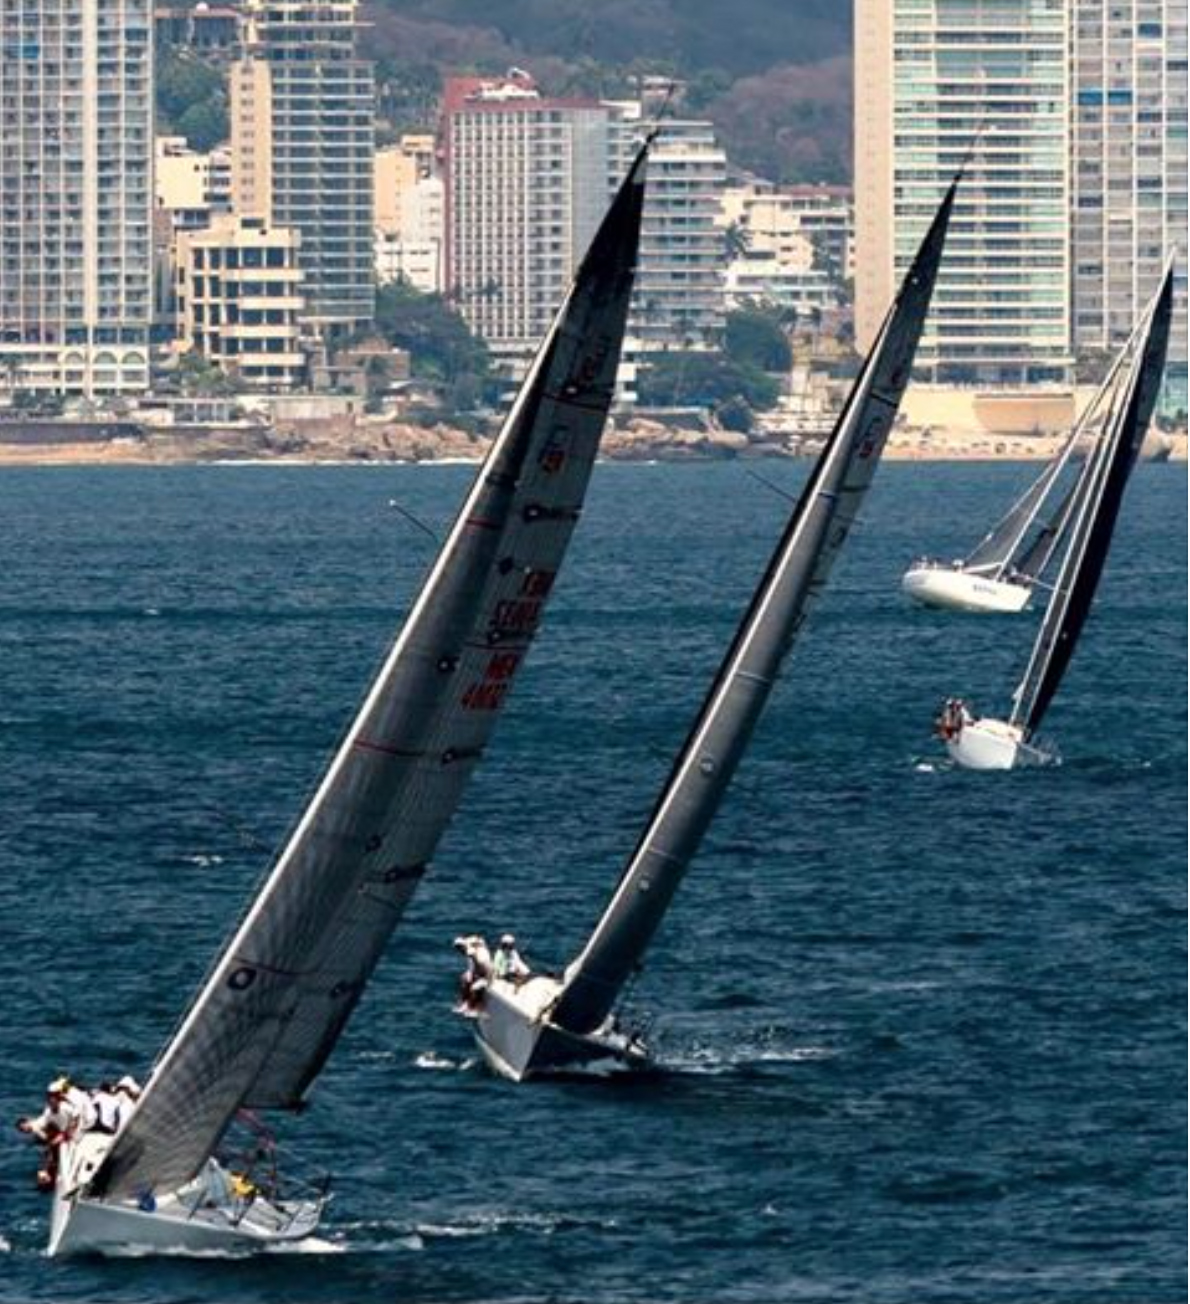 Three Farr 40s racing in Acapulco, Mexico: FRENCH KISS, NITEMARE and AKELARRE.